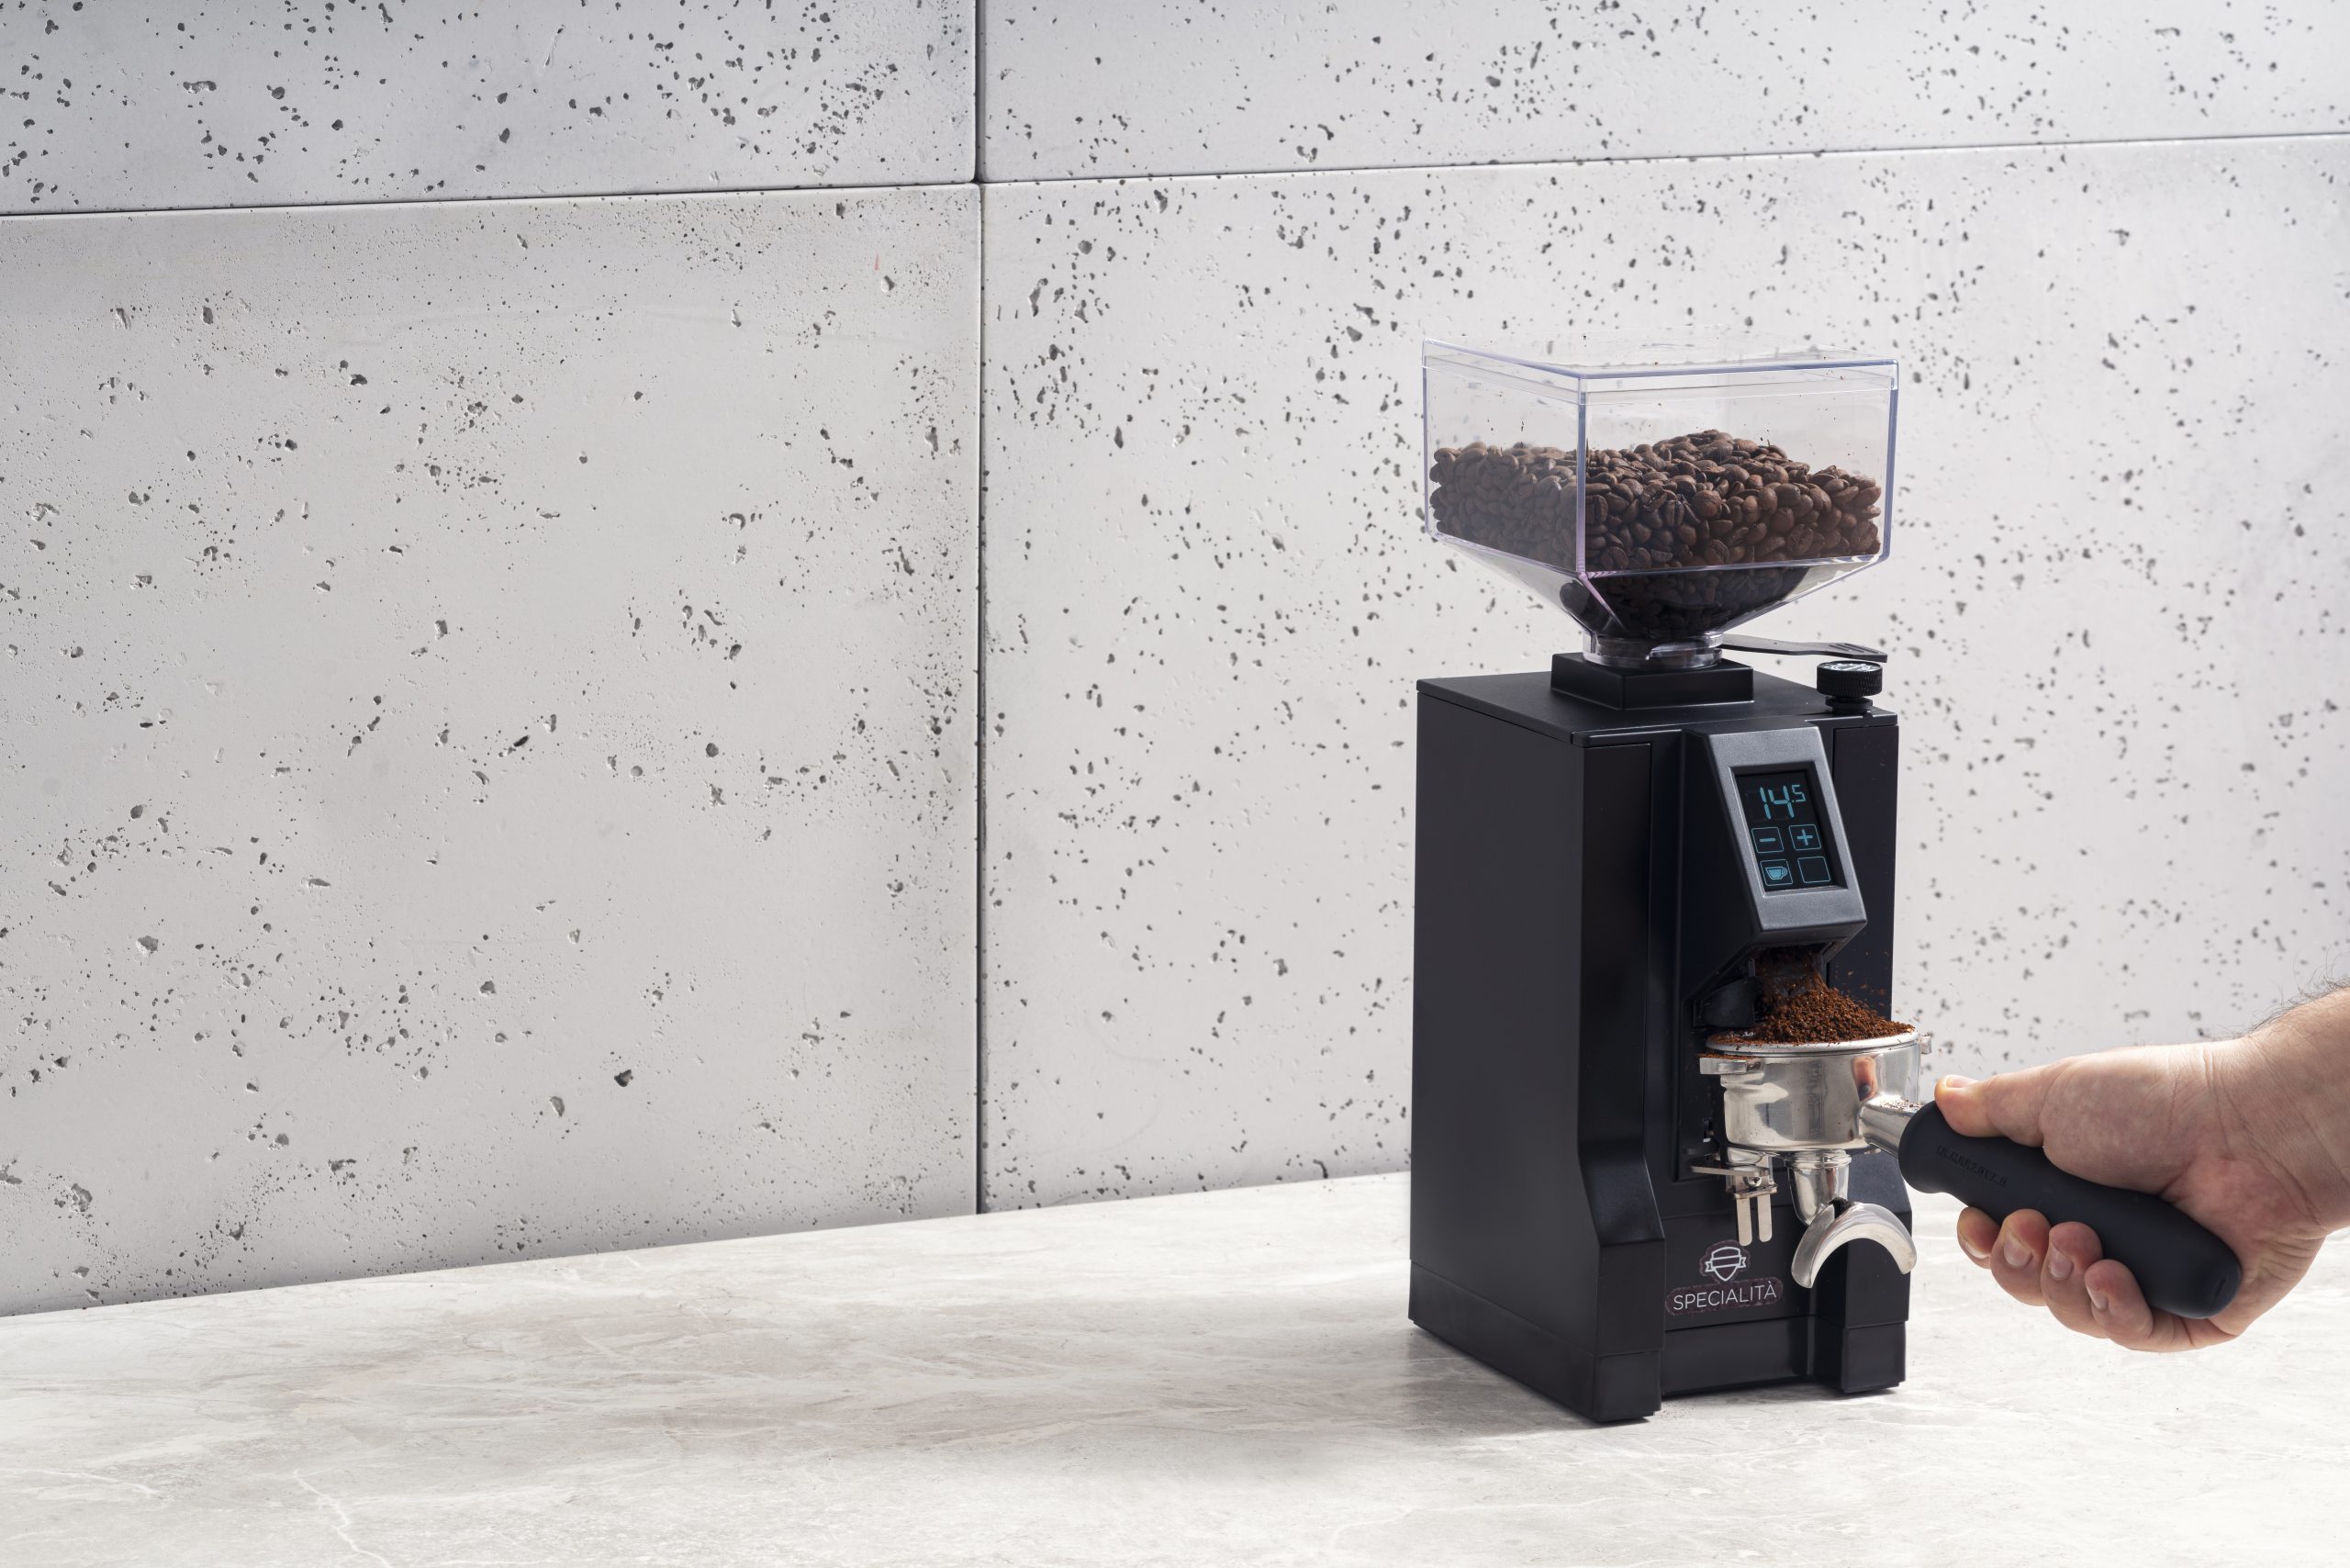 Wilfa Performance Coffee Maker Brings Style and Flavor to Home